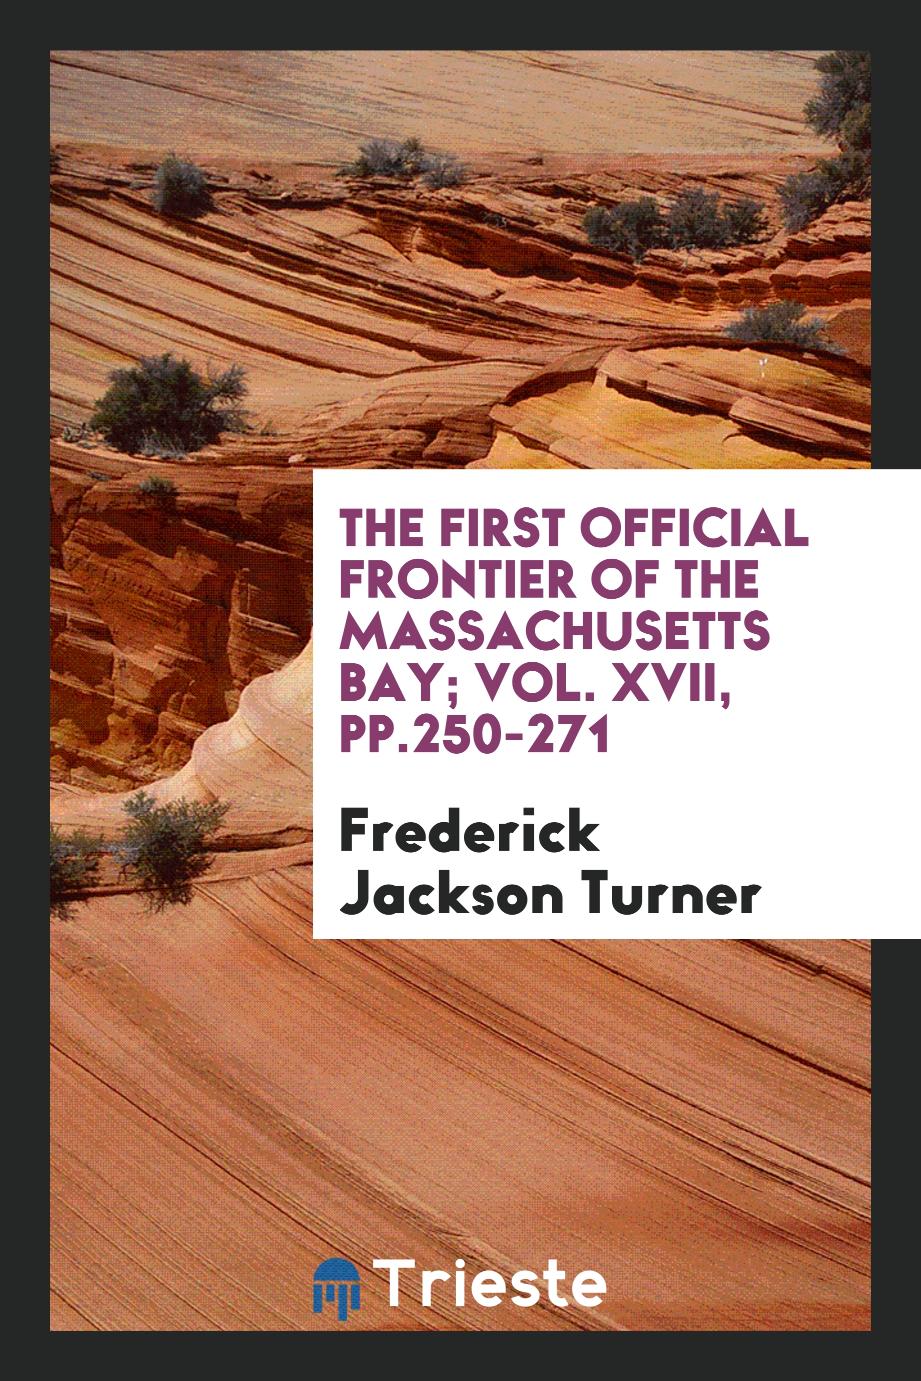 The First Official Frontier of the Massachusetts Bay; Vol. XVII, pp.250-271